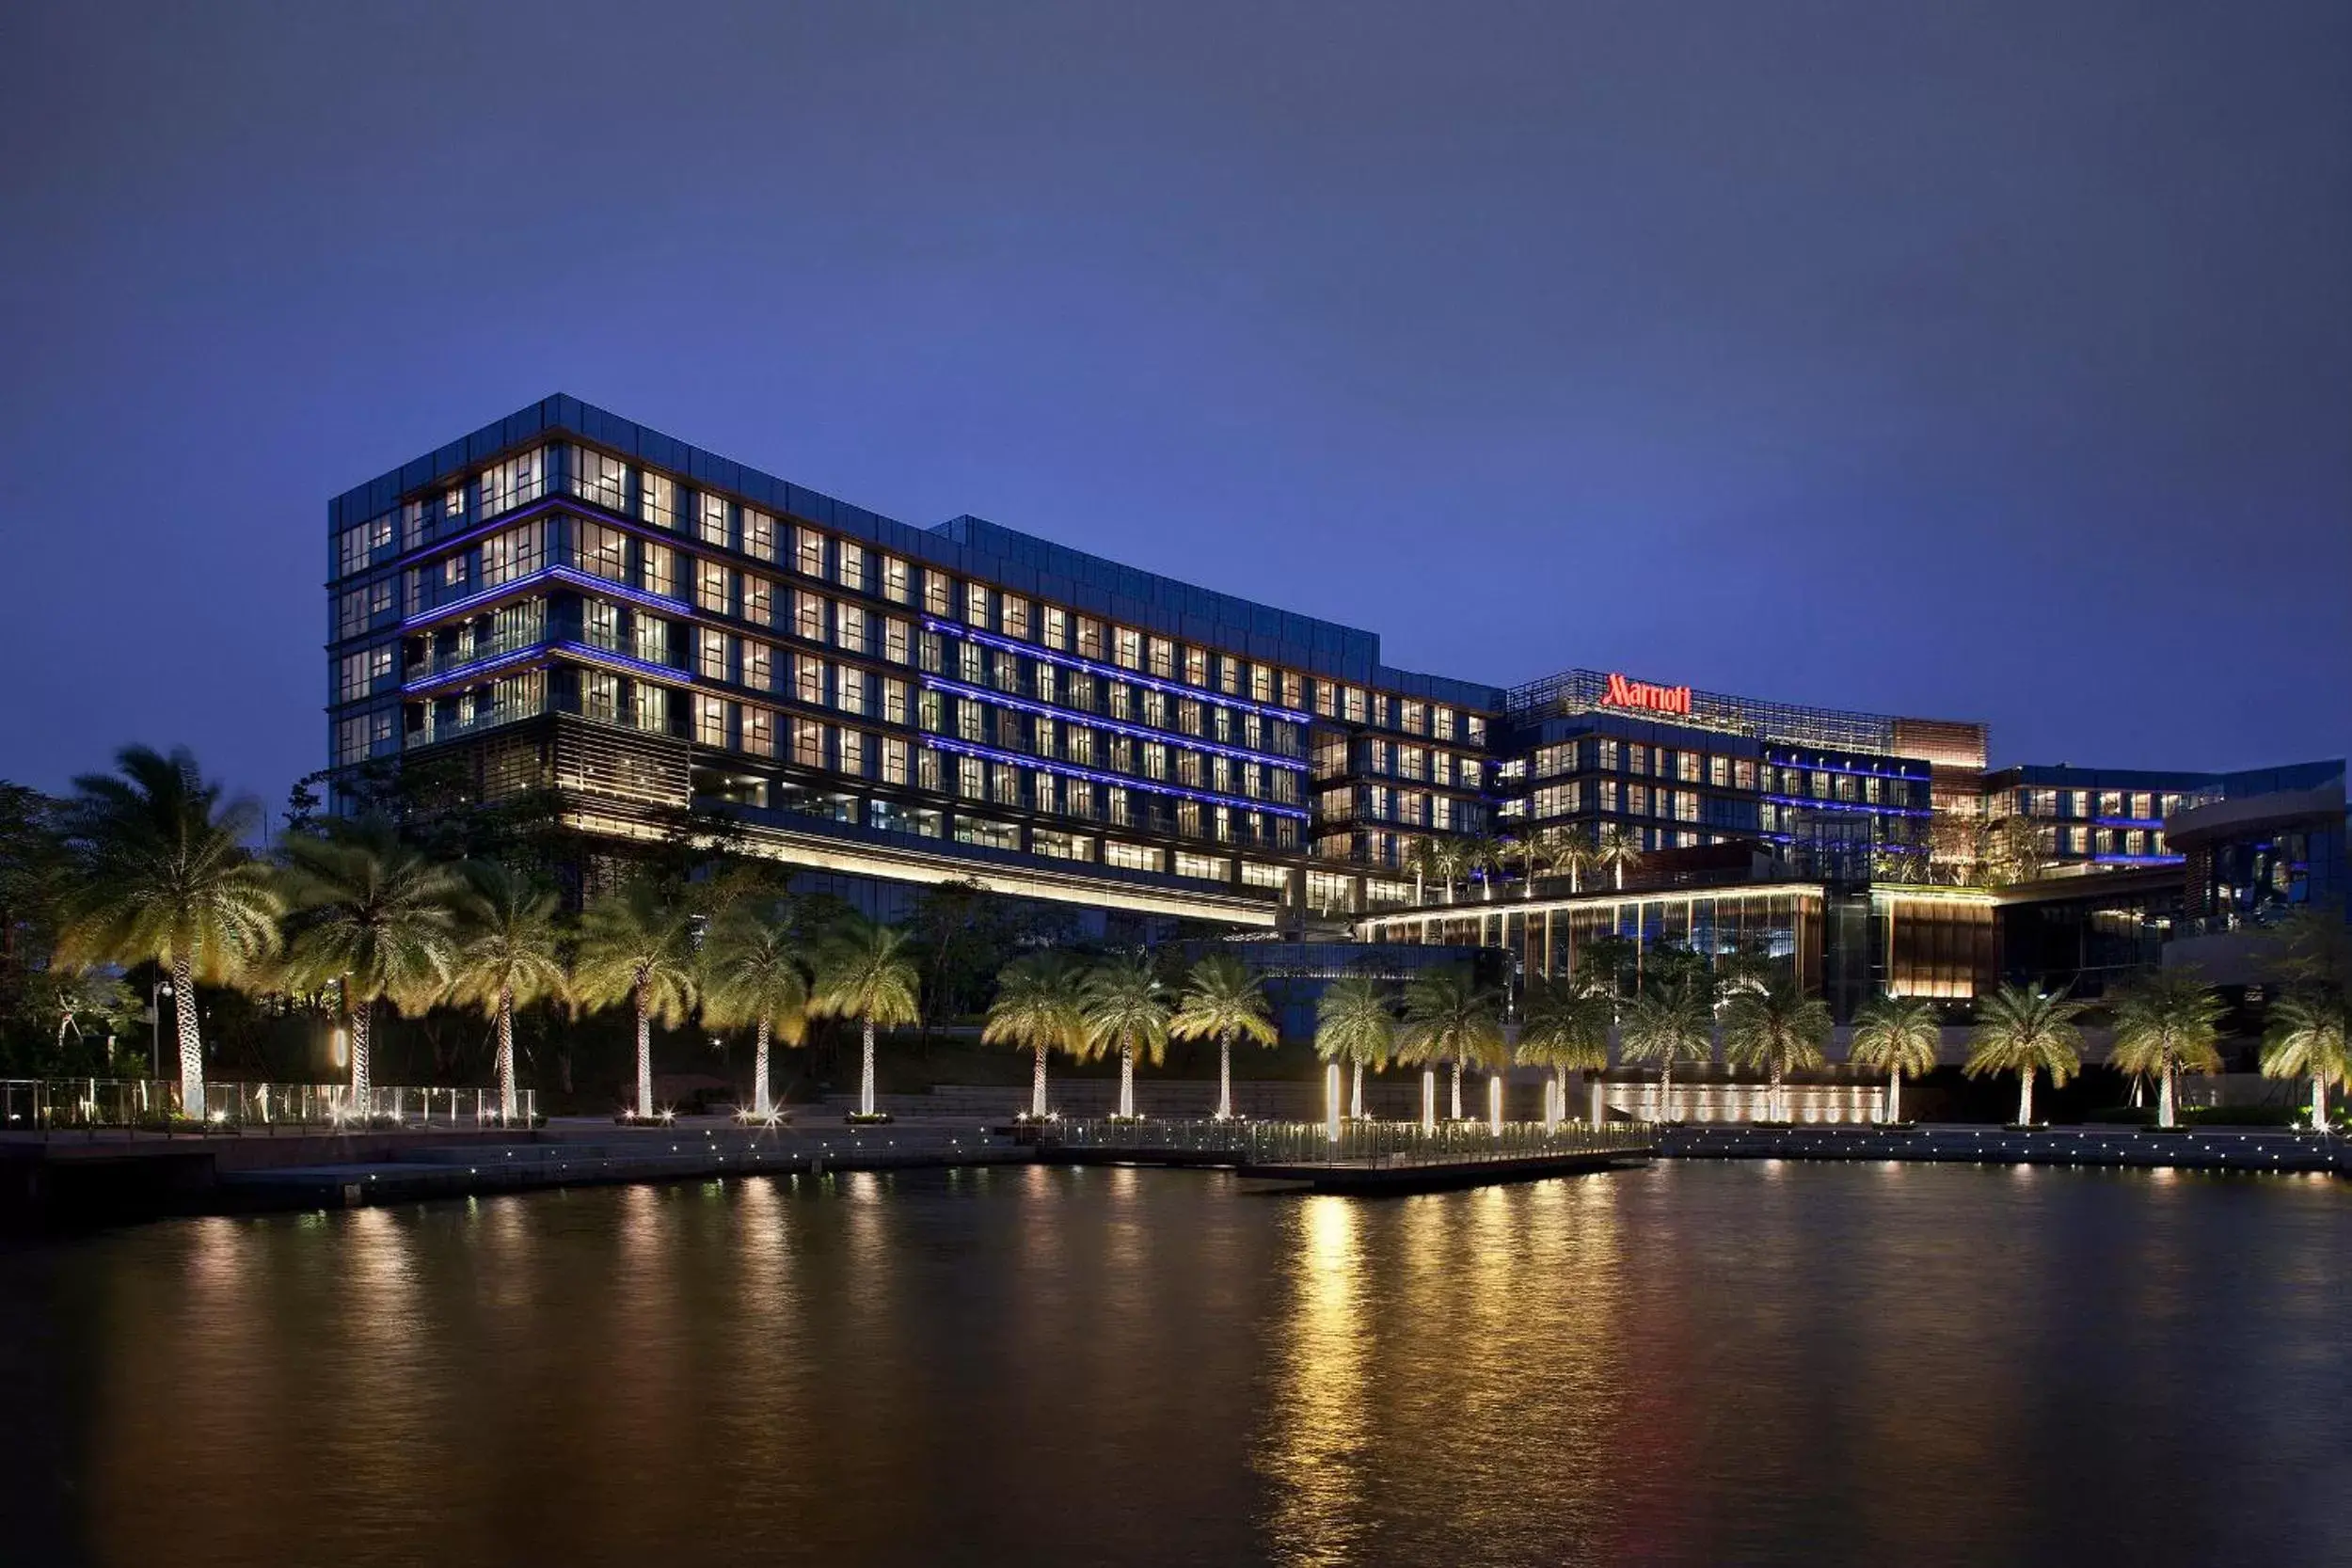 Lake view, Property Building in The OCT Harbour, Shenzhen - Marriott Executive Apartments